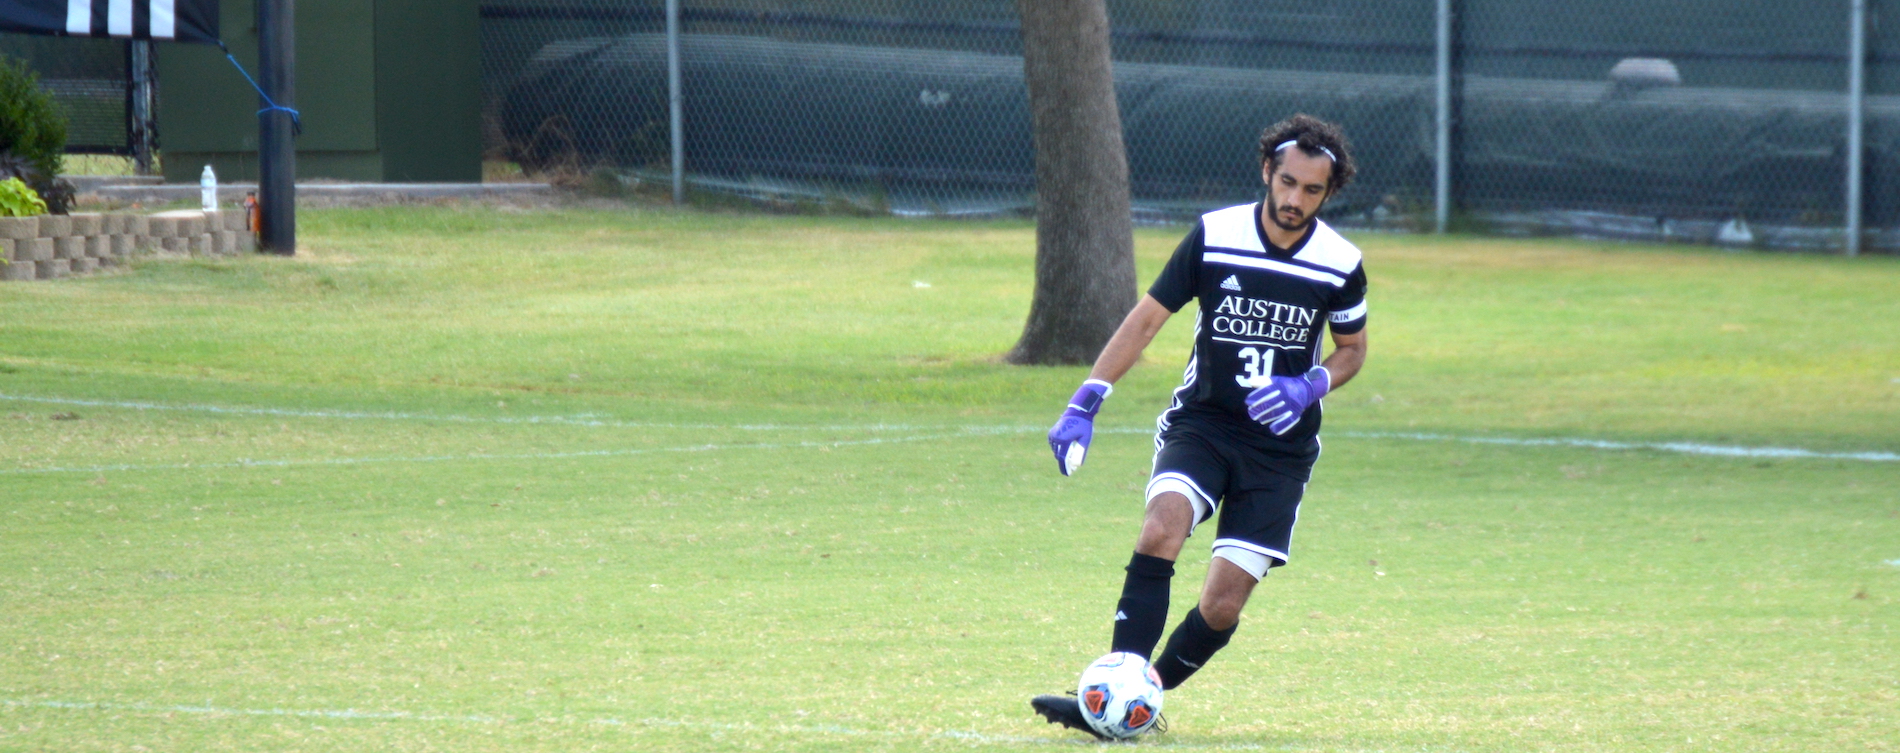 Khalaf Named Finalist for 2019 SCAC Man of the Year Award